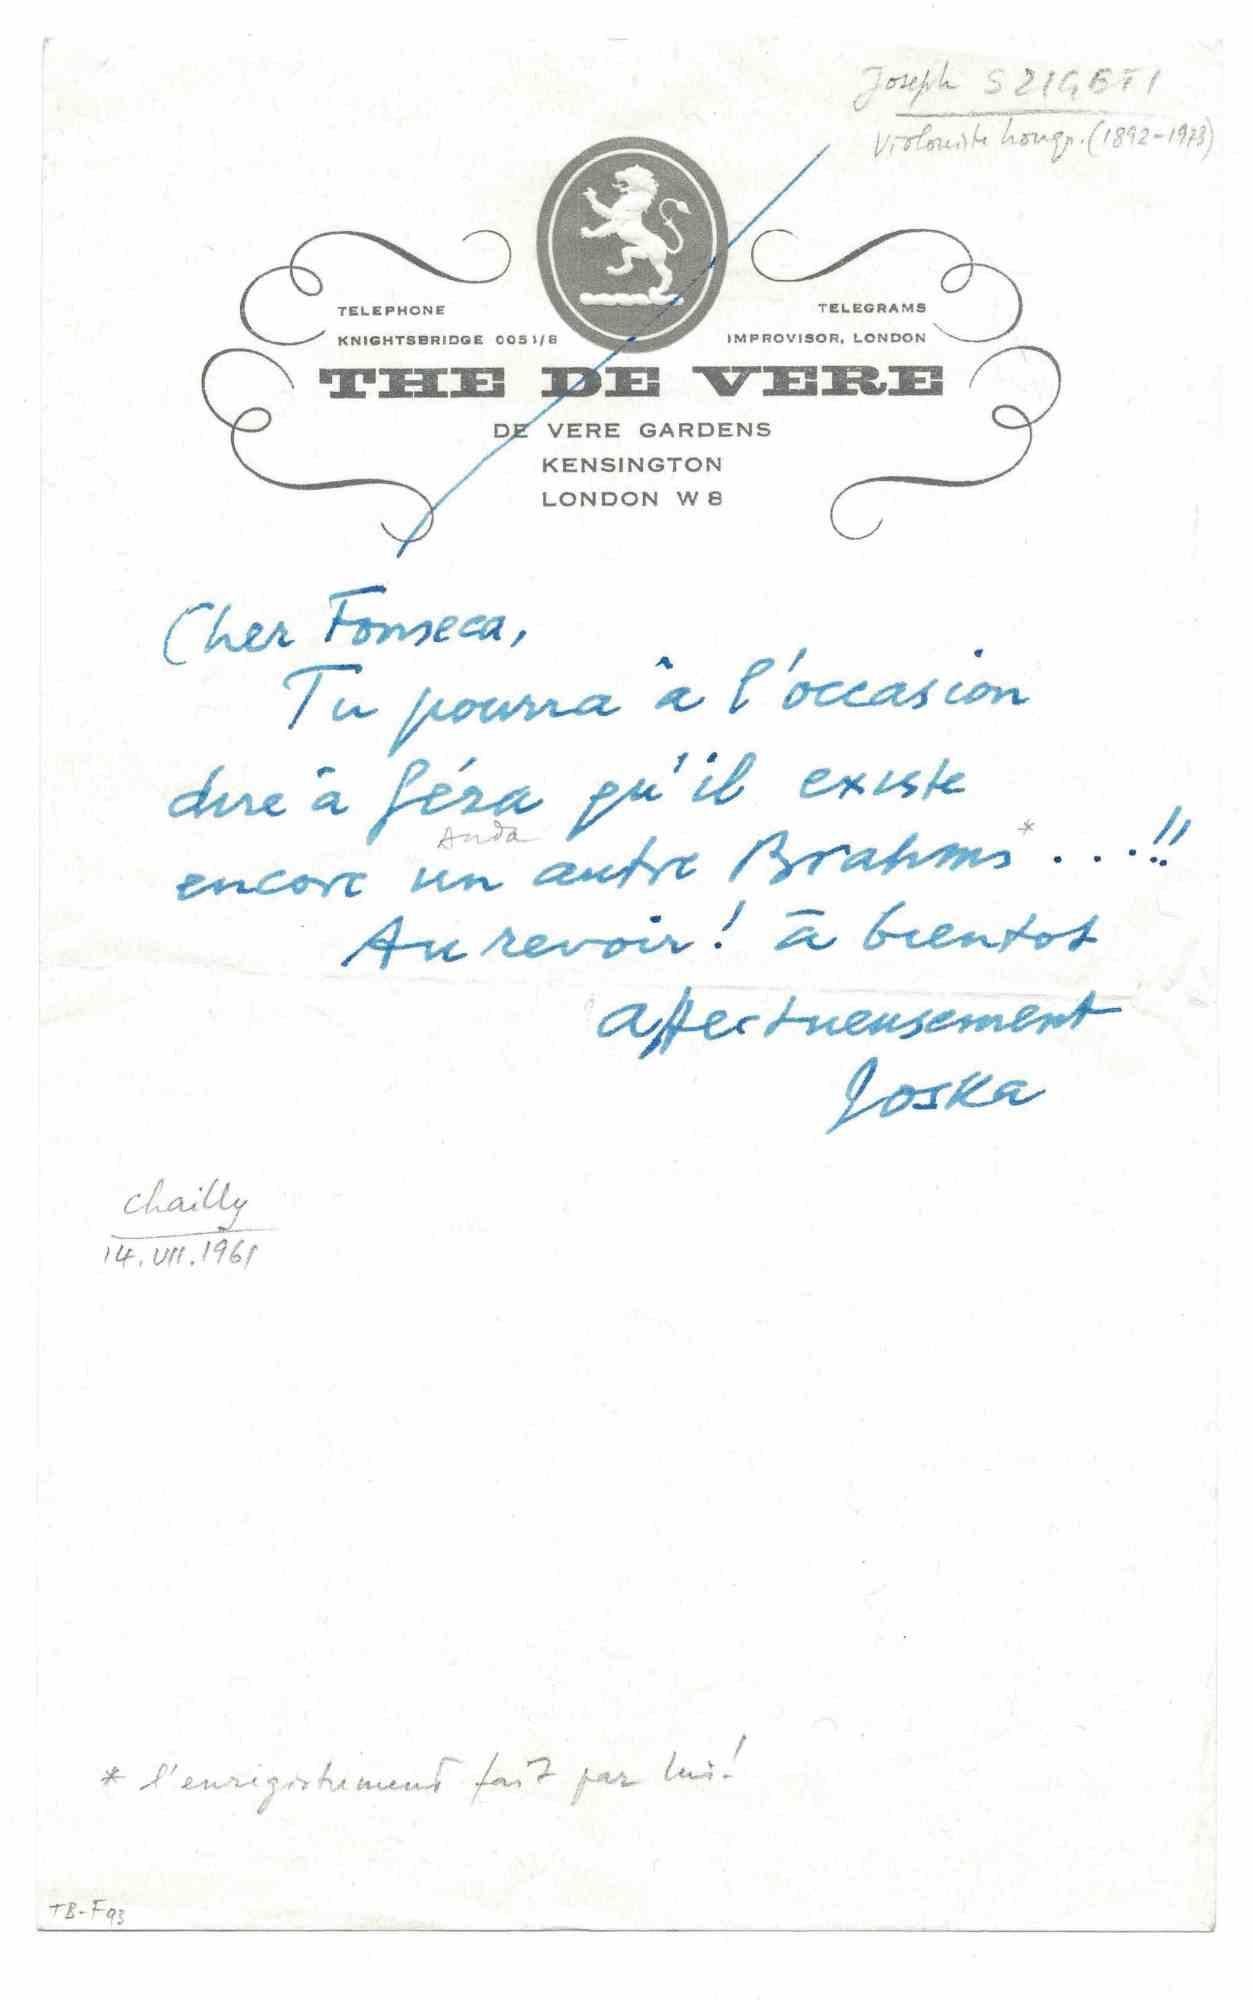 Autograph Letter signed, not dated [postmarked on the envelope “Chailly 14.VII.1961”] by the Hungarian-American violinist Joseph Szigeti (Budapest, 1892 - Luzern, 1973).

Szigeti writes to Jean-Pierre Fonda (a.k.a. Jean-Pierre Fournier, son of the